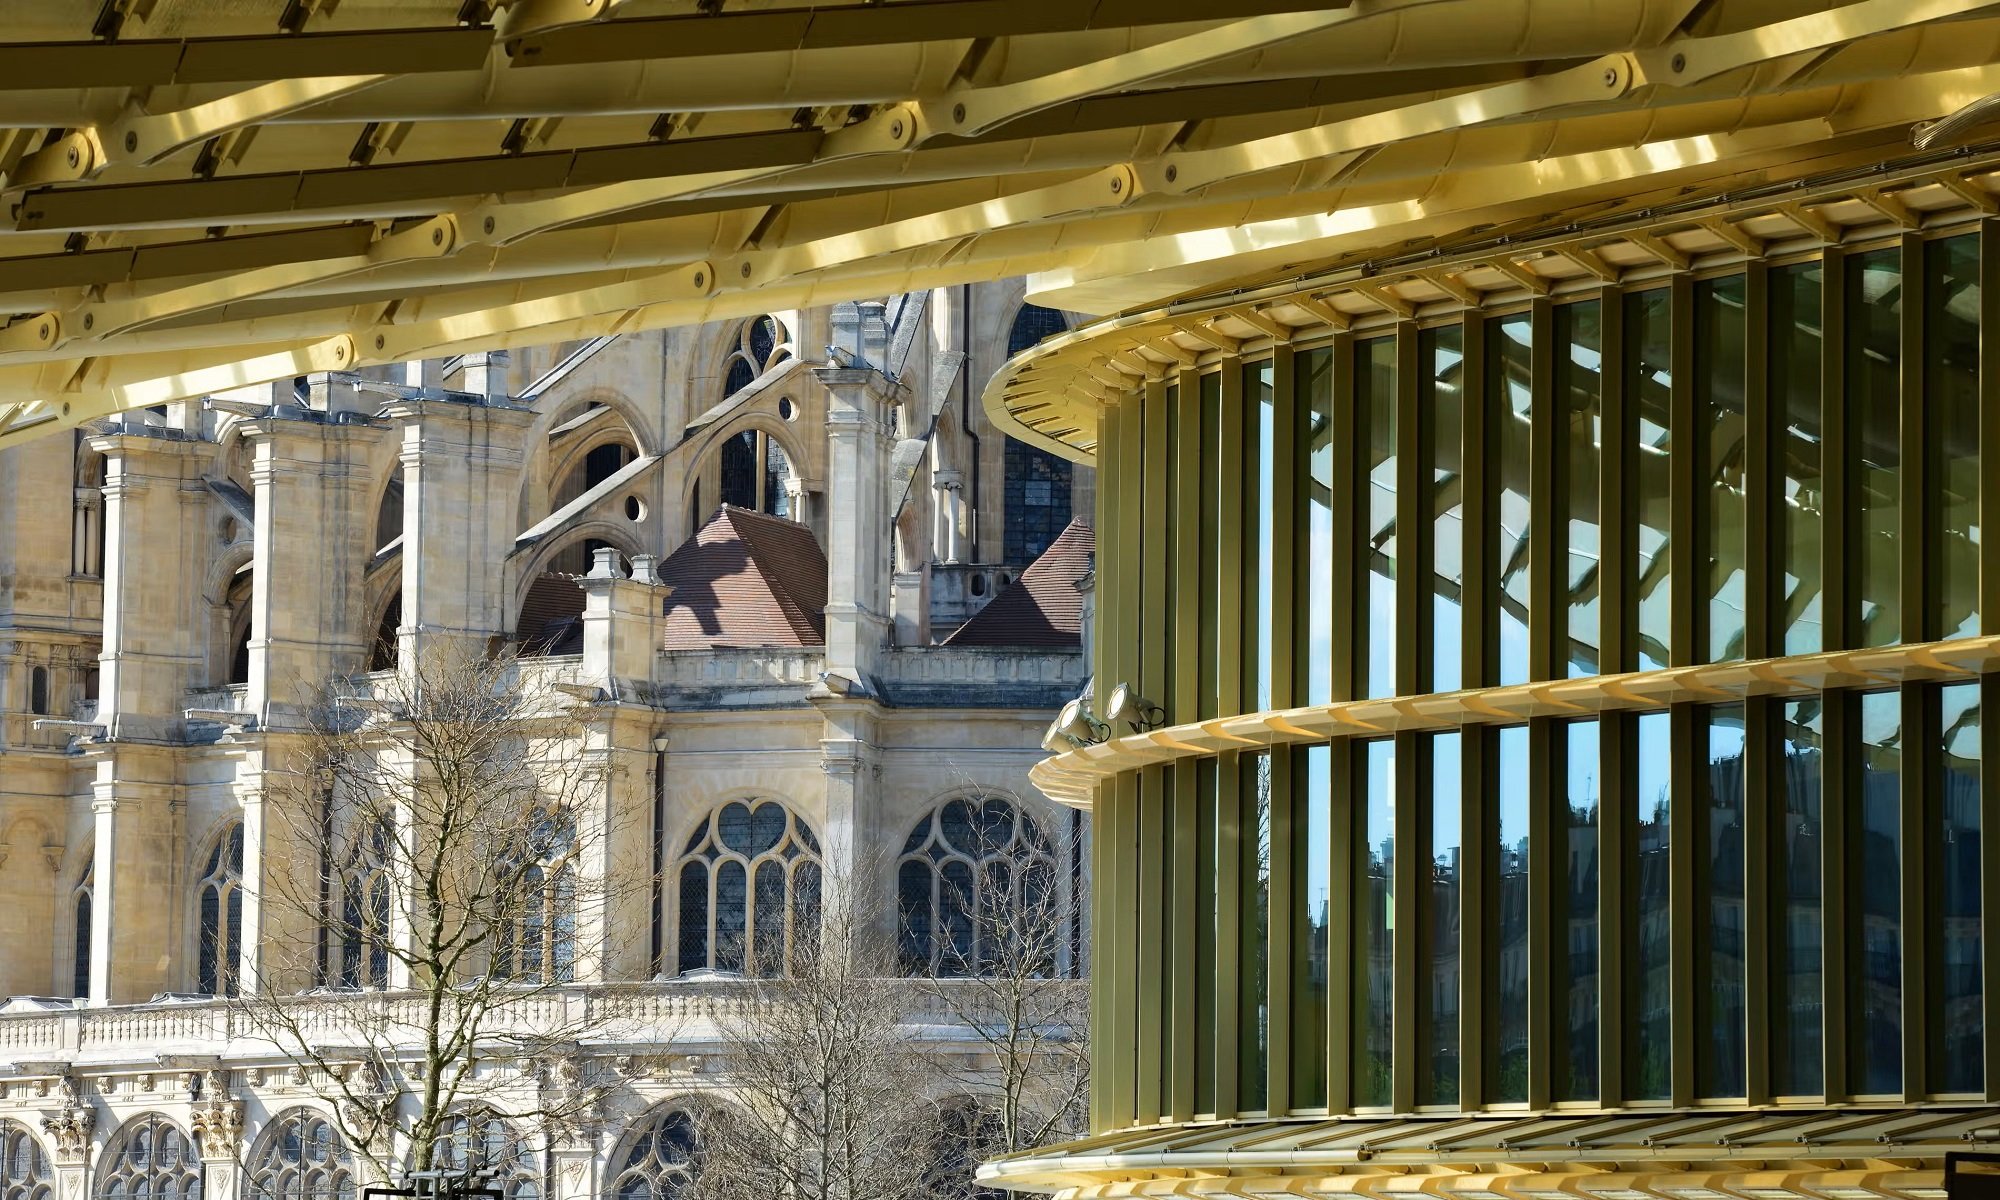 The €1bn les halles renovation in paris: a controversial transformation